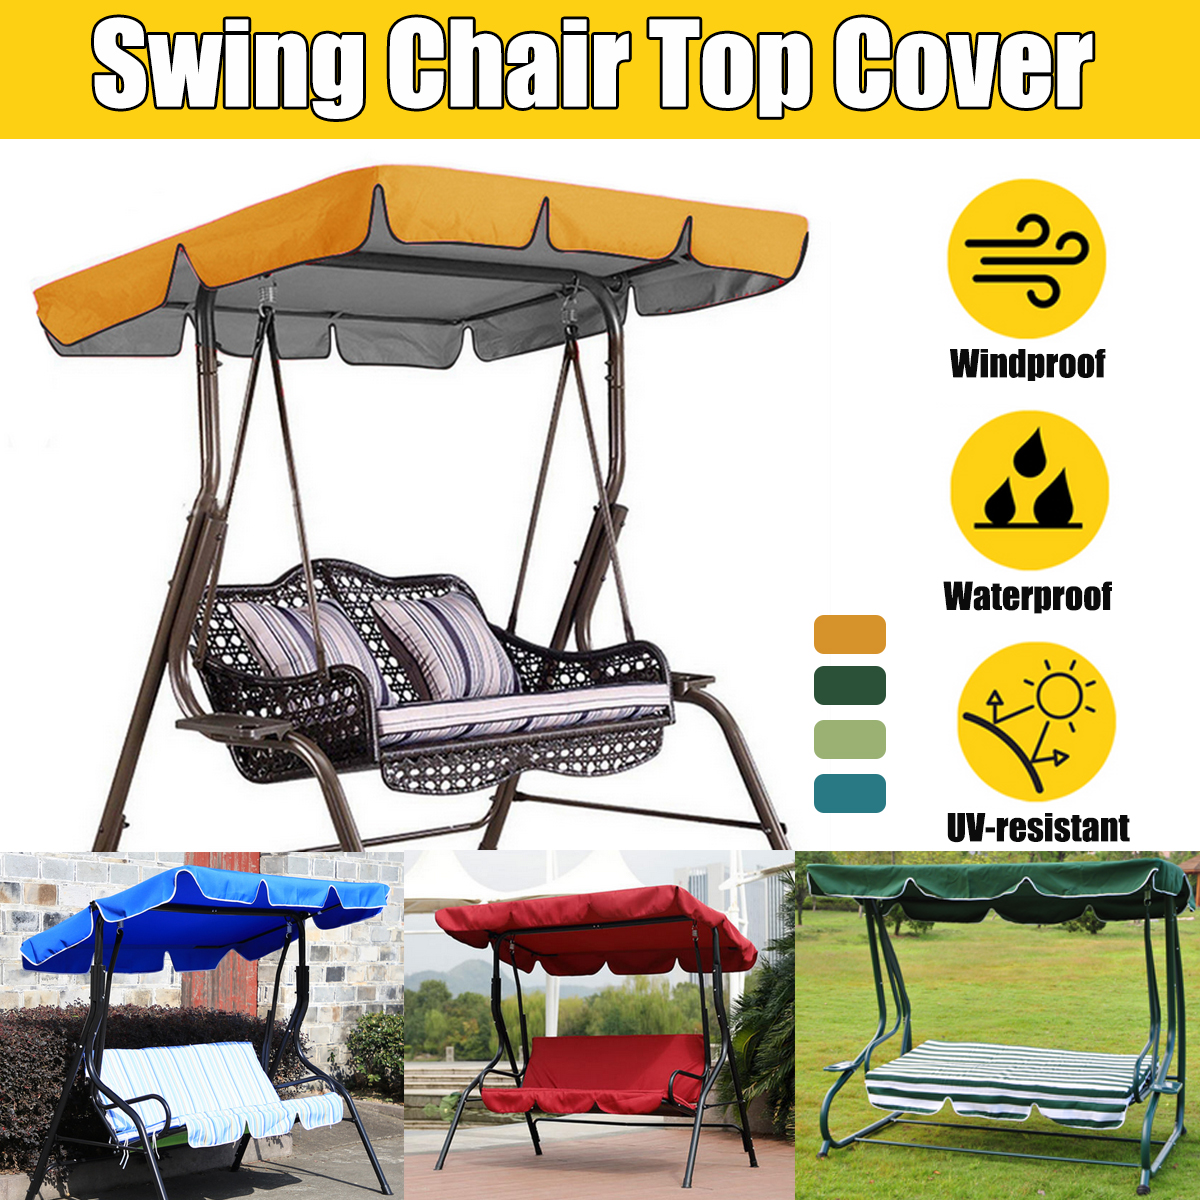 Swing-Chair-Top-Cover-Replacement-Canopy-Porch-Park-Patio-Outdoor-Garden-Without-Swing-1744343